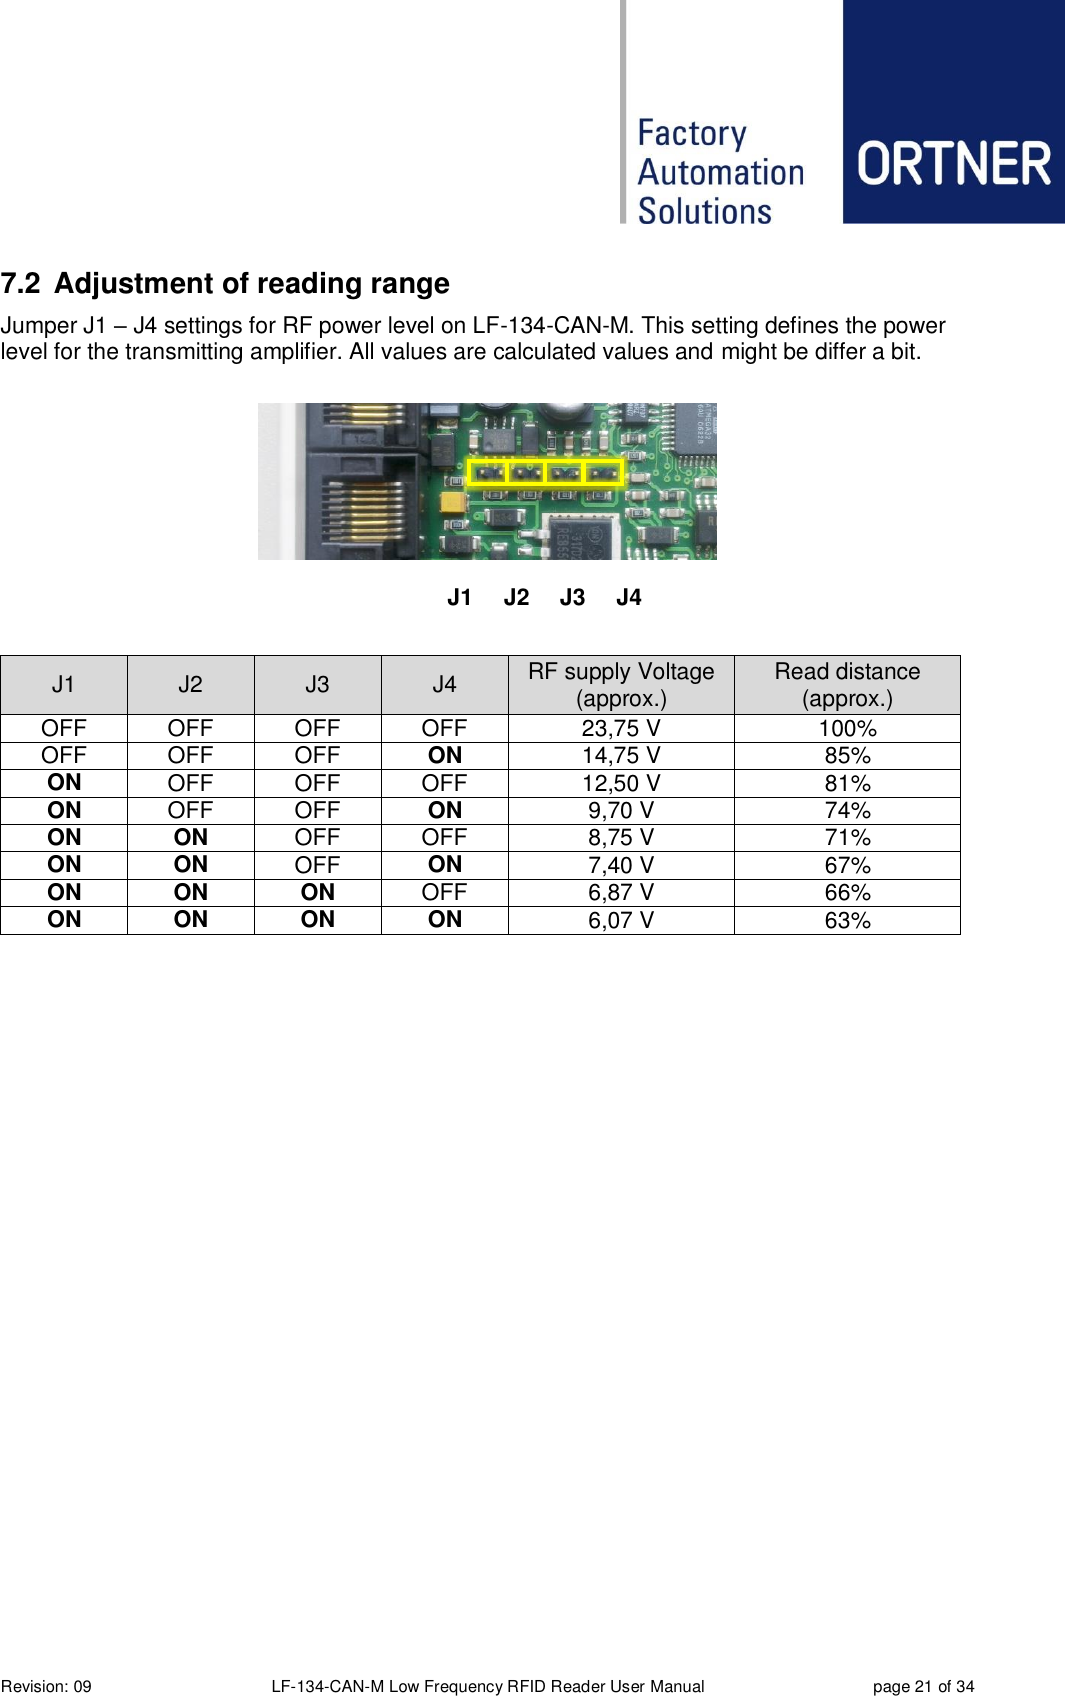  Revision: 09 LF-134-CAN-M Low Frequency RFID Reader User Manual  page 21 of 34 7.2  Adjustment of reading range Jumper J1 – J4 settings for RF power level on LF-134-CAN-M. This setting defines the power level for the transmitting amplifier. All values are calculated values and might be differ a bit.     J1 J2 J3 J4 RF supply Voltage (approx.) Read distance (approx.) OFF OFF OFF OFF 23,75 V 100% OFF OFF OFF ON 14,75 V 85% ON OFF OFF OFF 12,50 V 81% ON OFF OFF ON 9,70 V 74% ON ON OFF OFF 8,75 V 71% ON ON OFF ON 7,40 V 67% ON ON ON OFF 6,87 V 66% ON ON ON ON 6,07 V 63%    J1 J2 J3 J4  